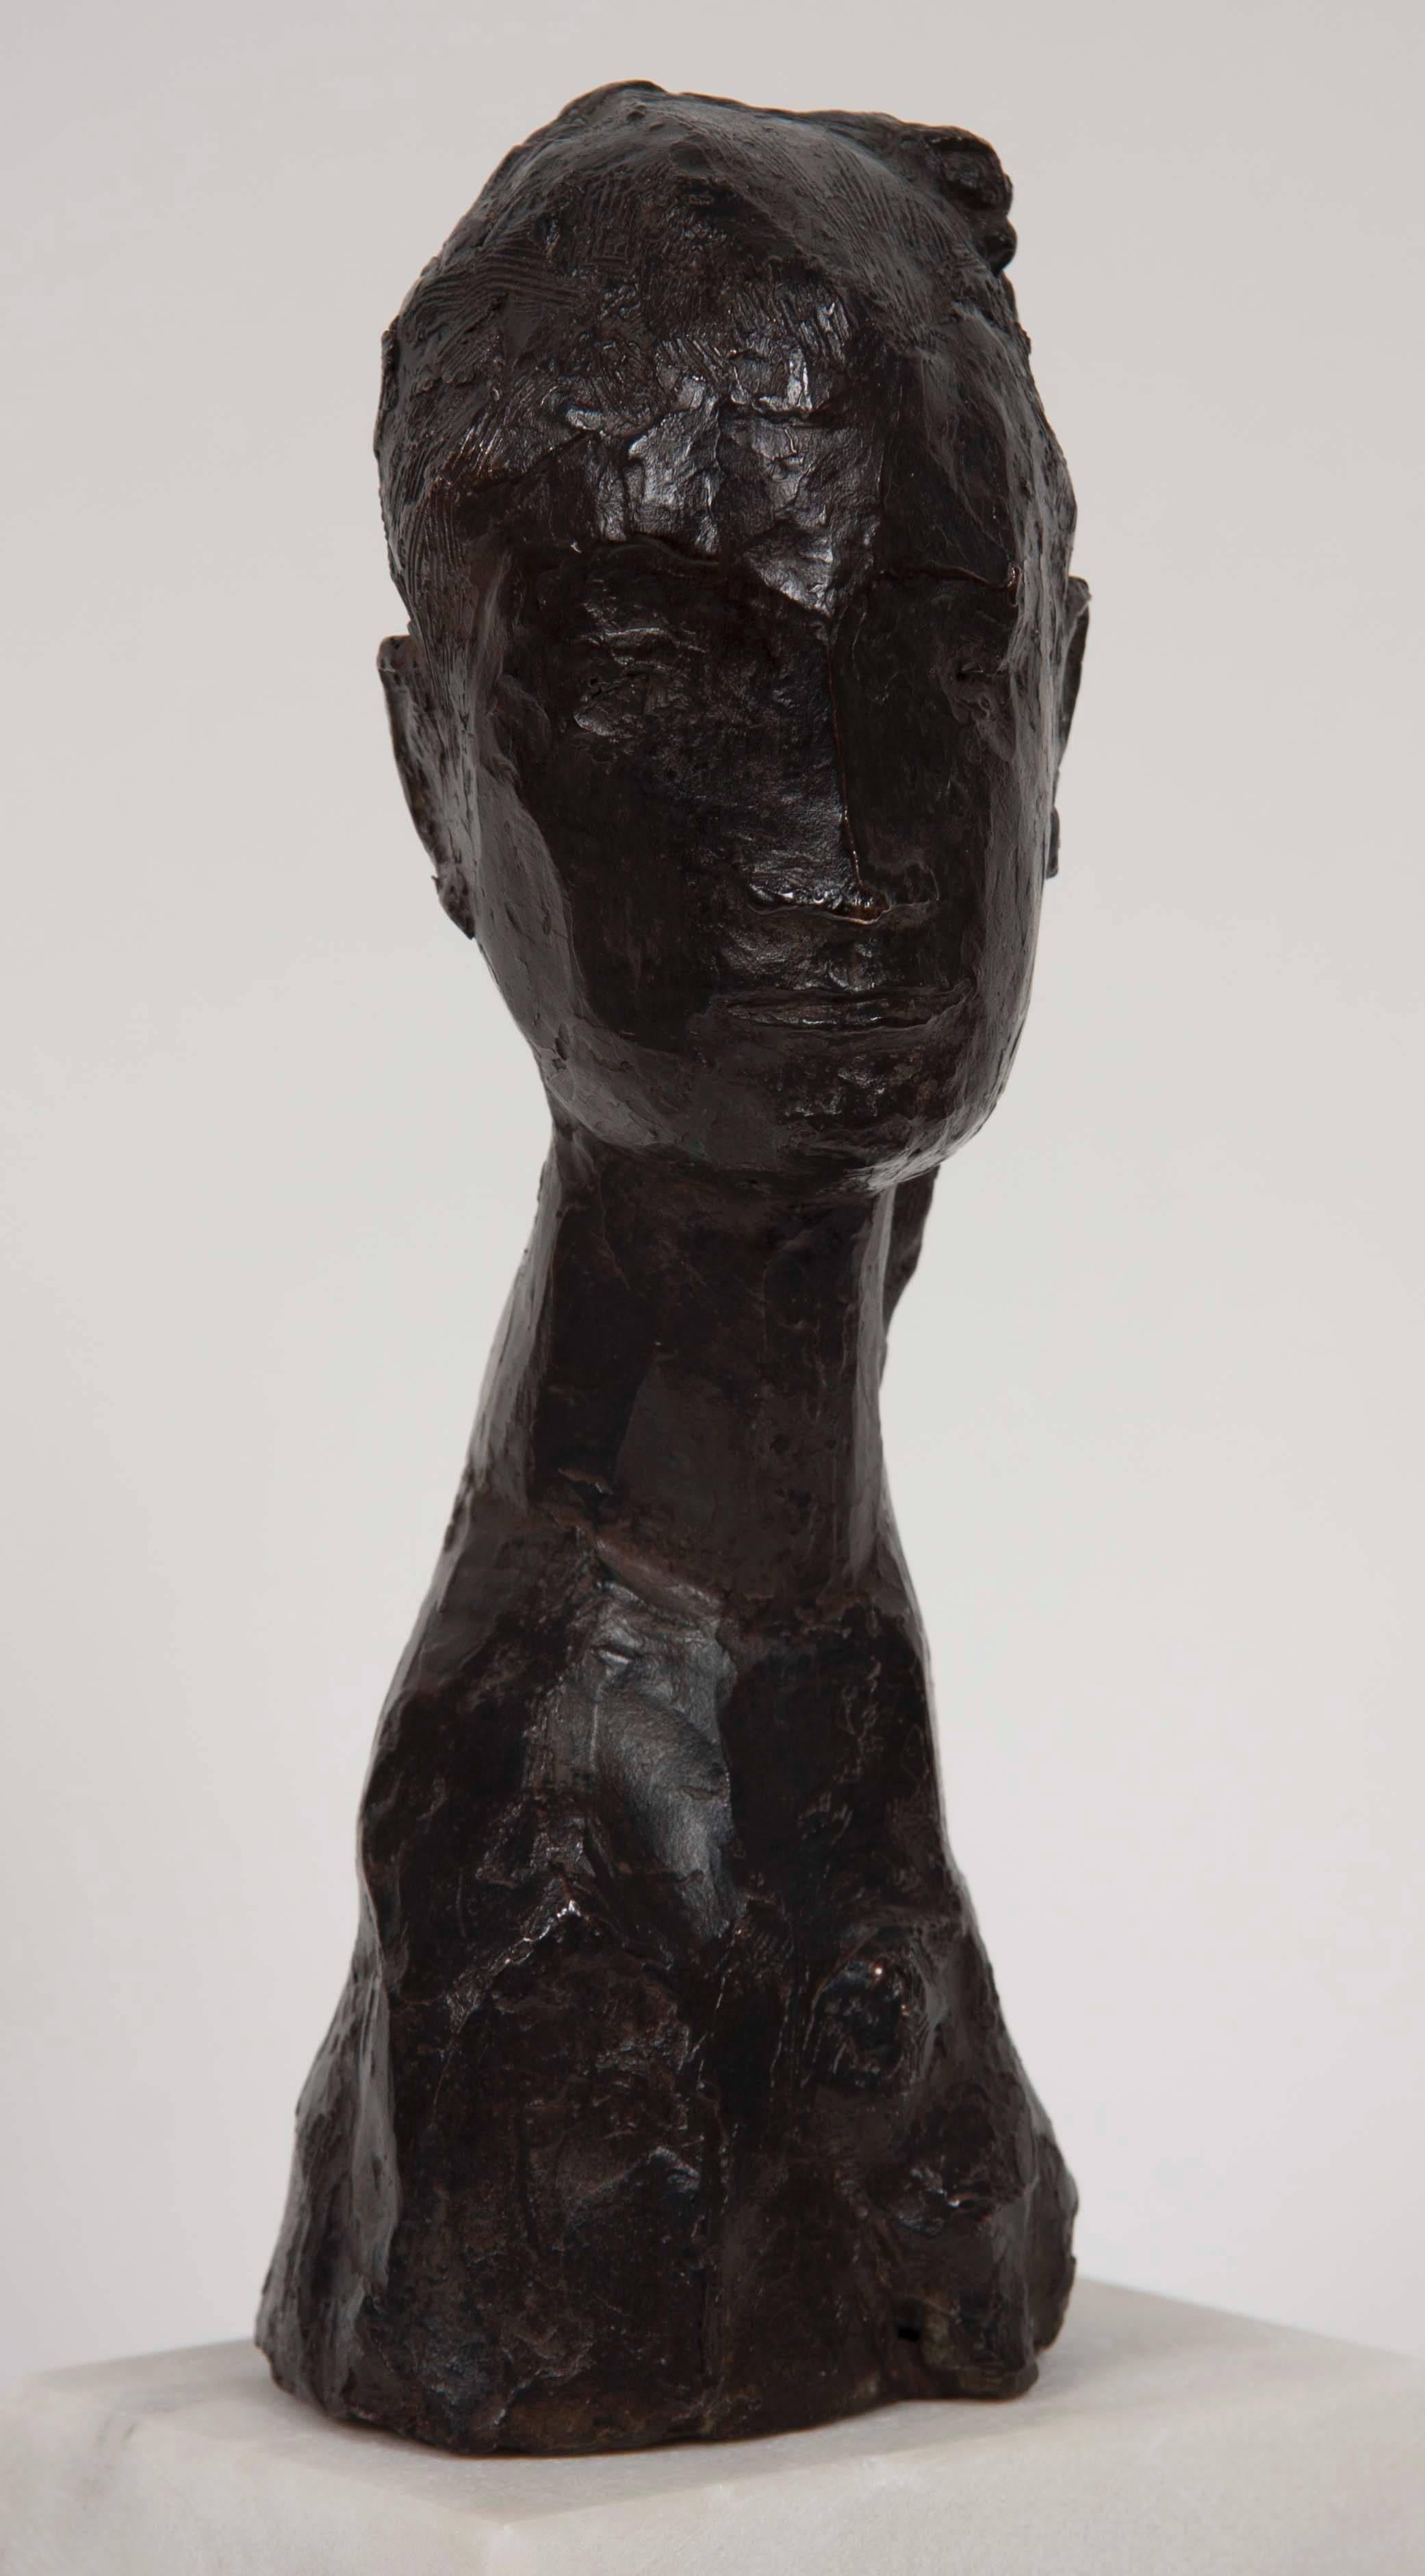 A bronze sculpture by Irving Marantz which is number 2 of 8. Originally sold at Babcock Galleries in New York.